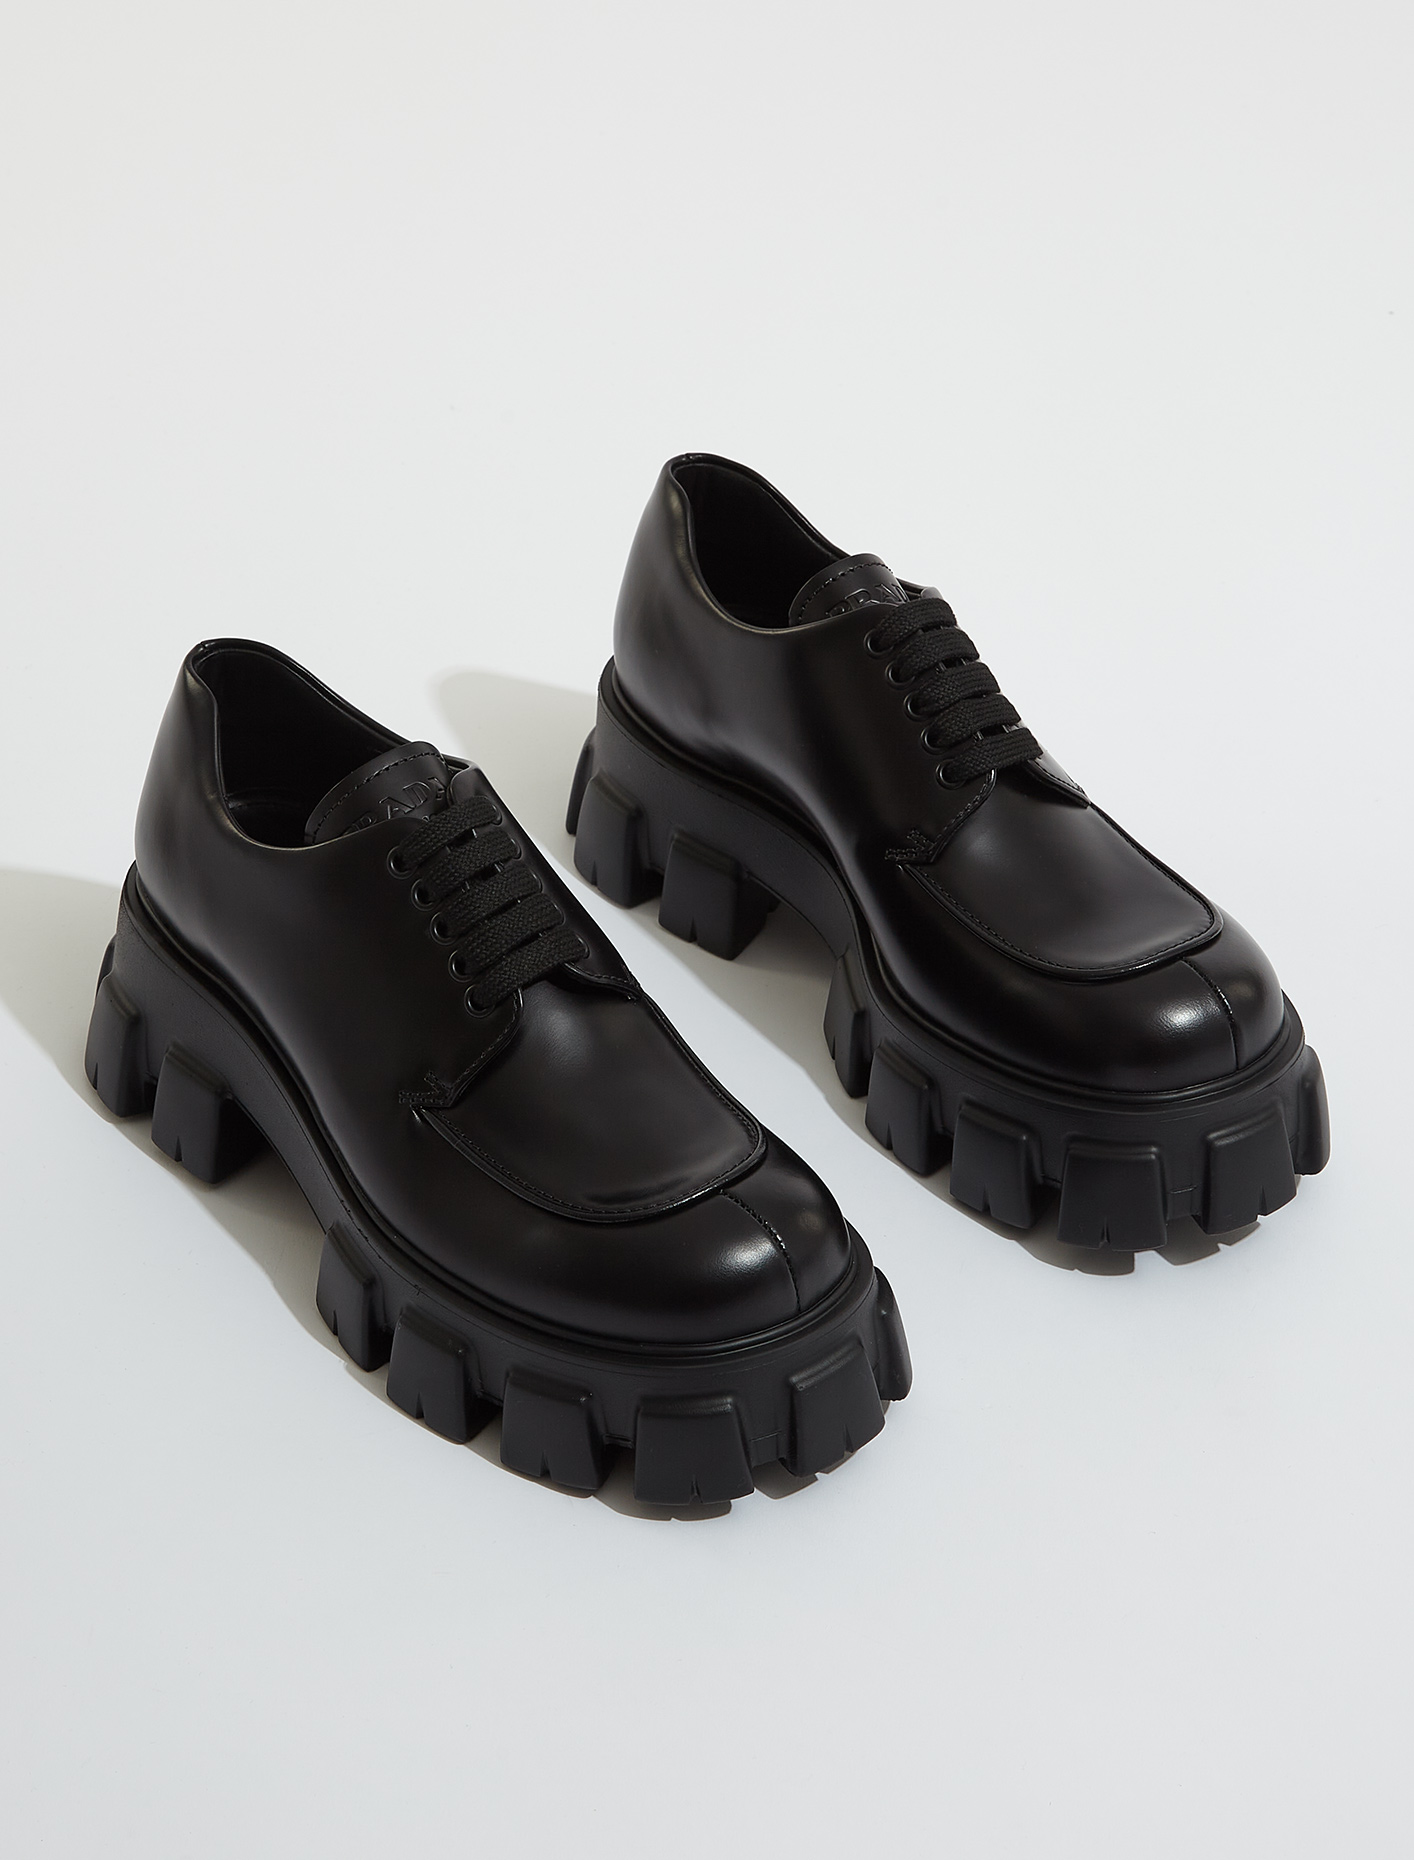 Prada Monolith Brushed Leather Lace-up Shoes in Black | Voo Store 